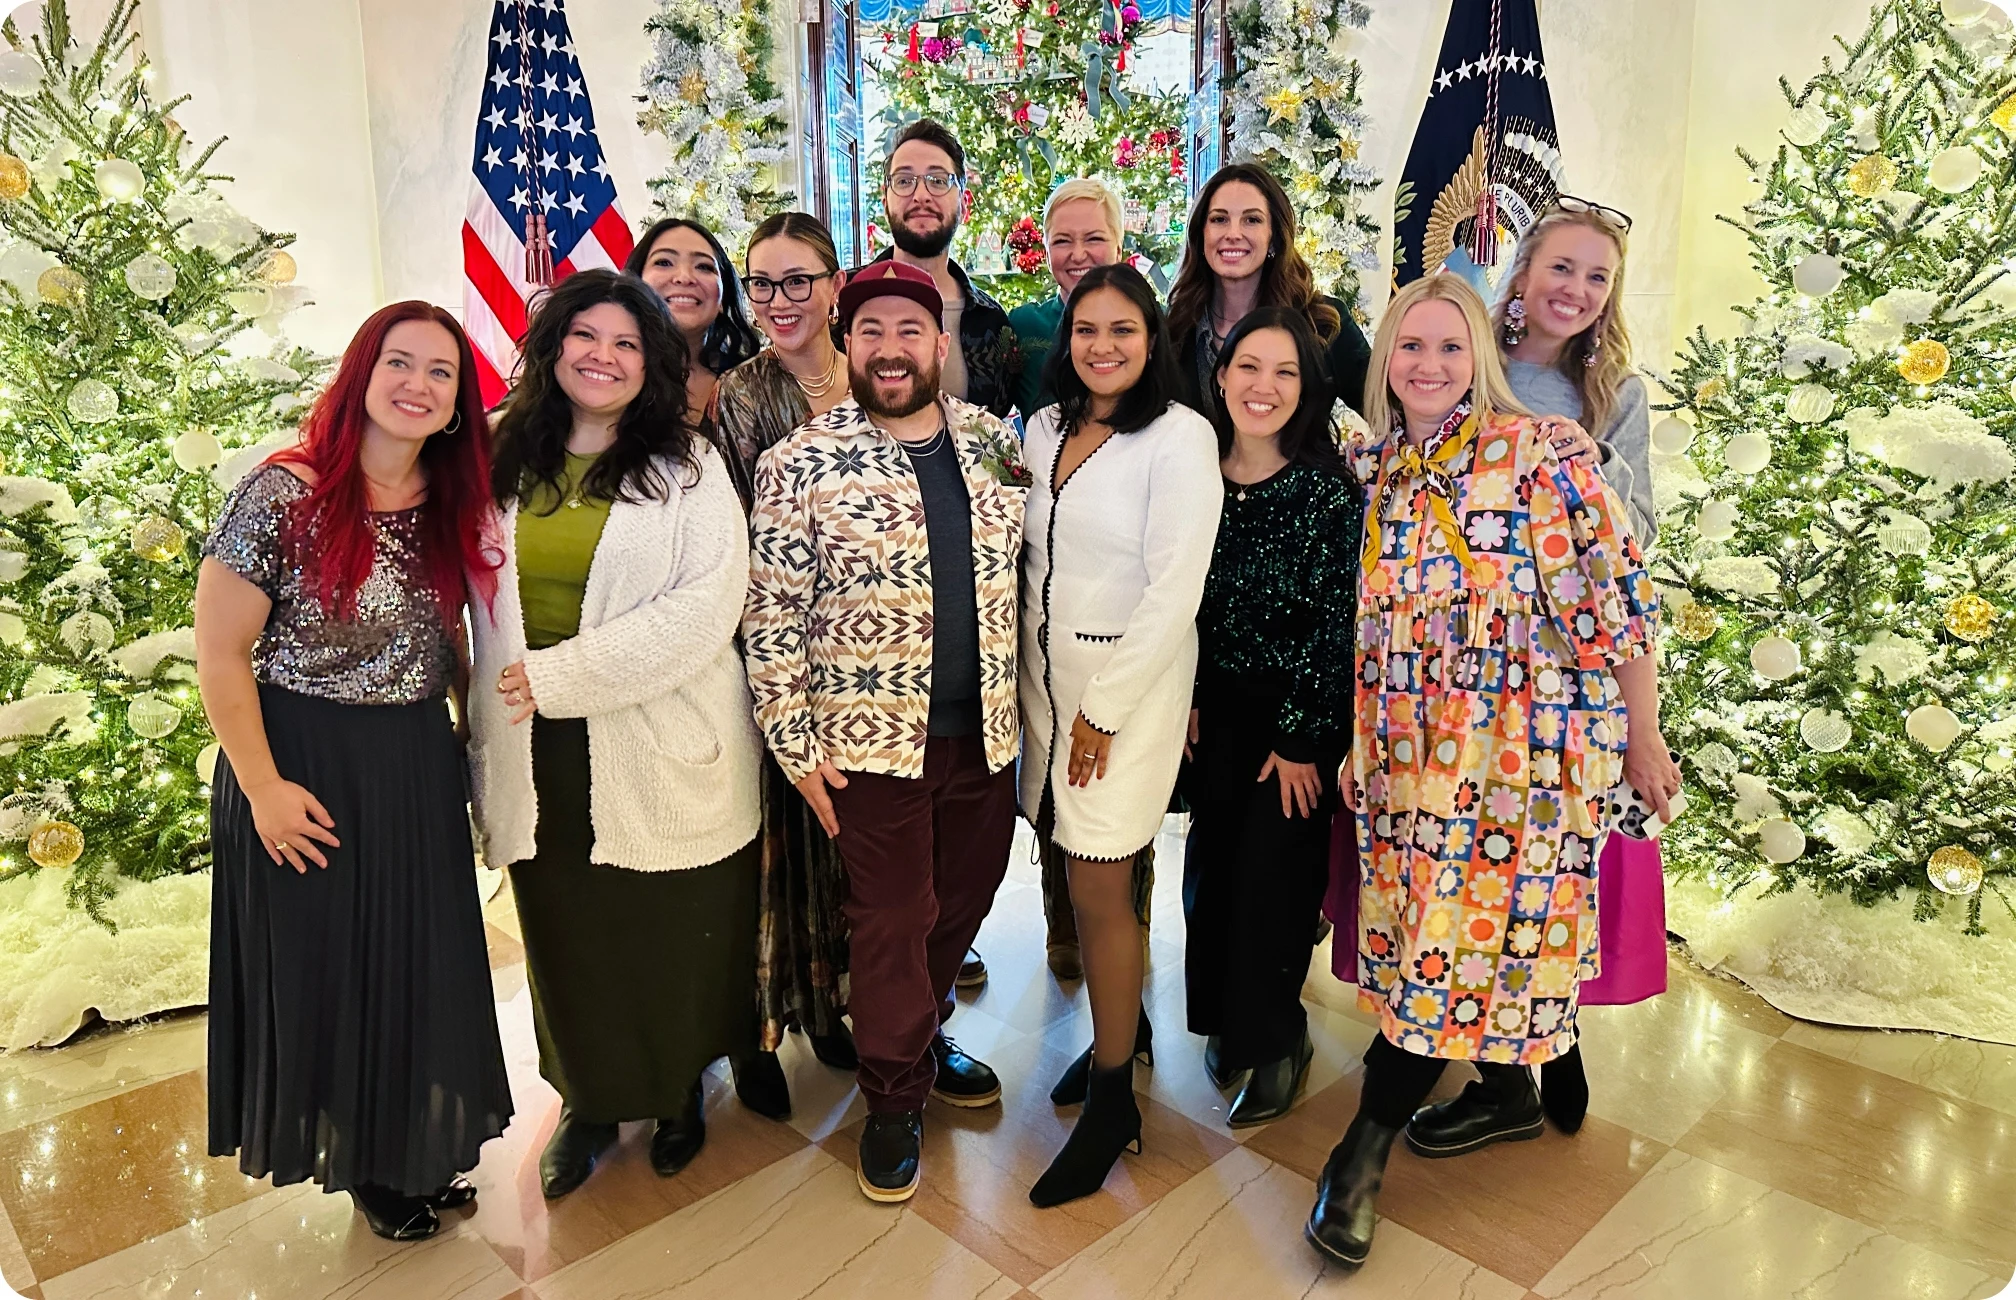 Group photo of Pinterest Creators during visit to The White House